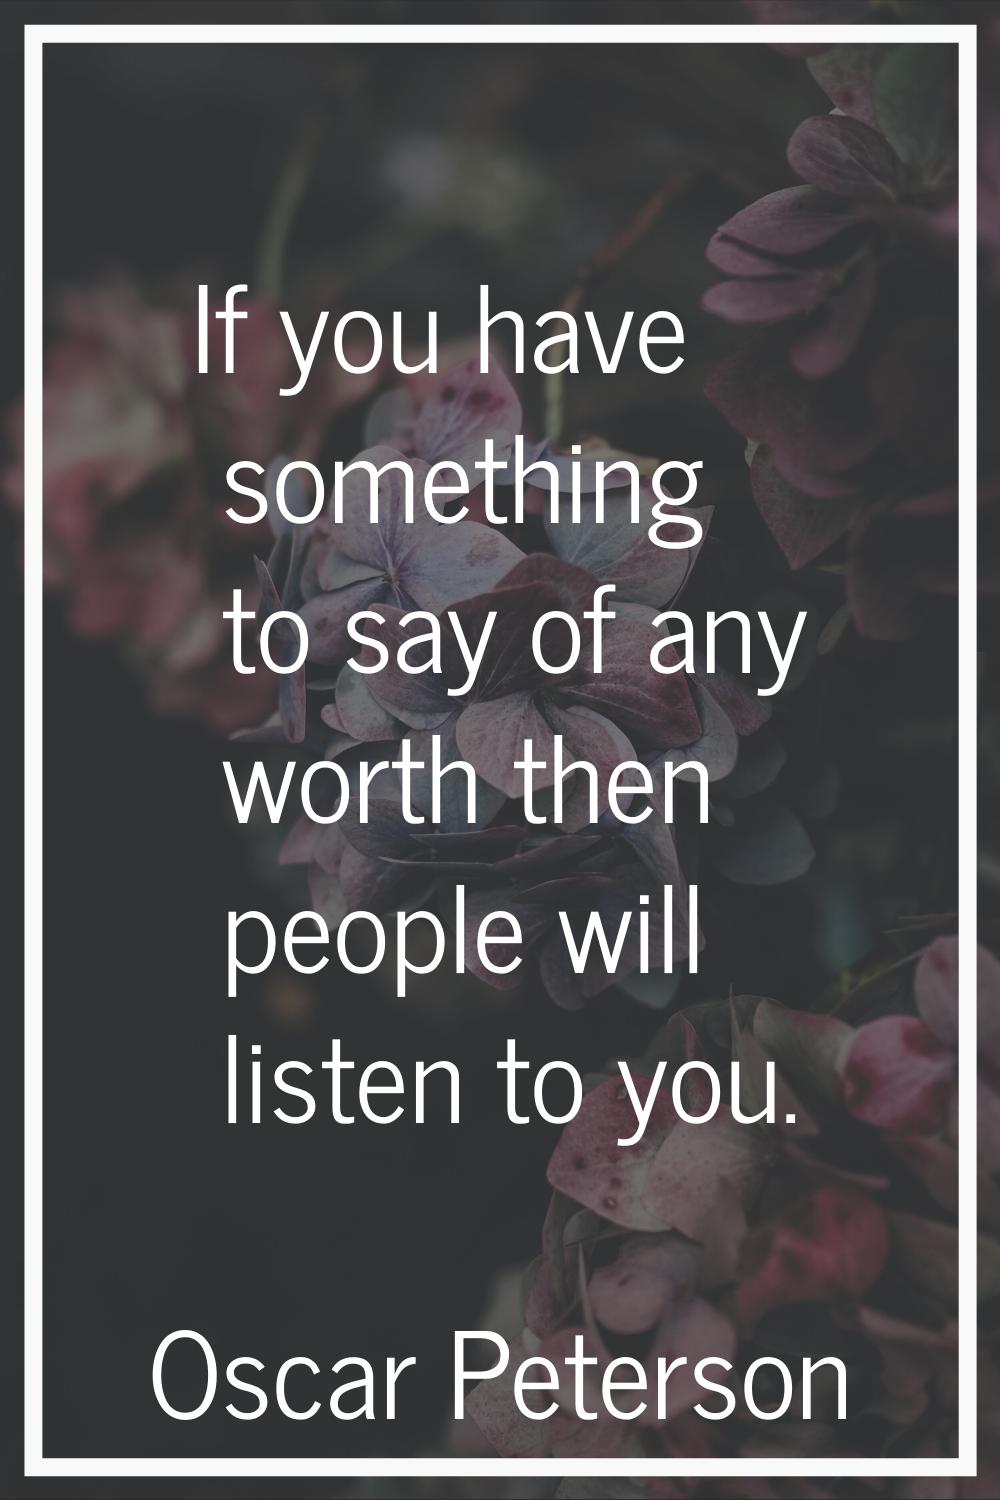 If you have something to say of any worth then people will listen to you.